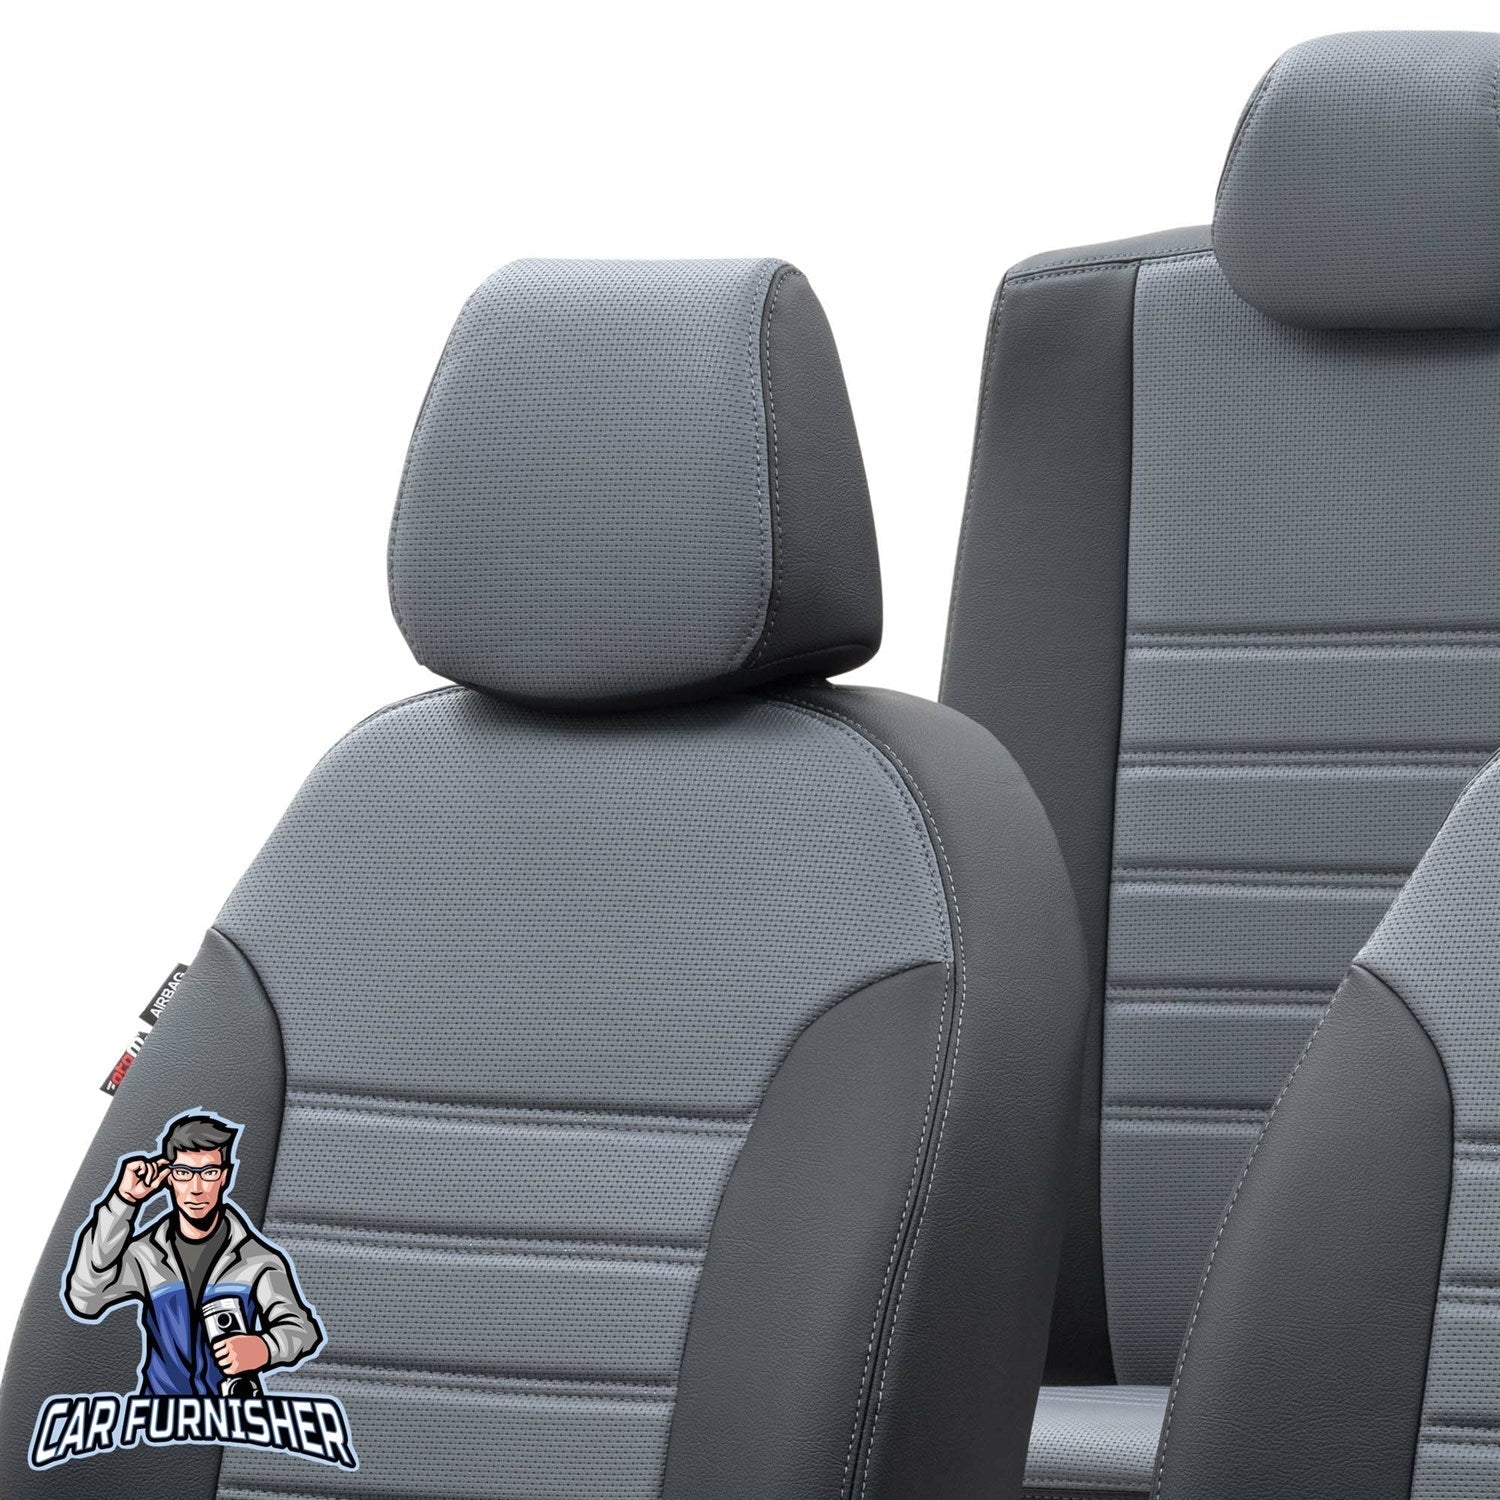 Renault Premium Seat Cover New York Leather Design Smoked Black Front Seats (2 Seats + Handrest + Headrests) Leather